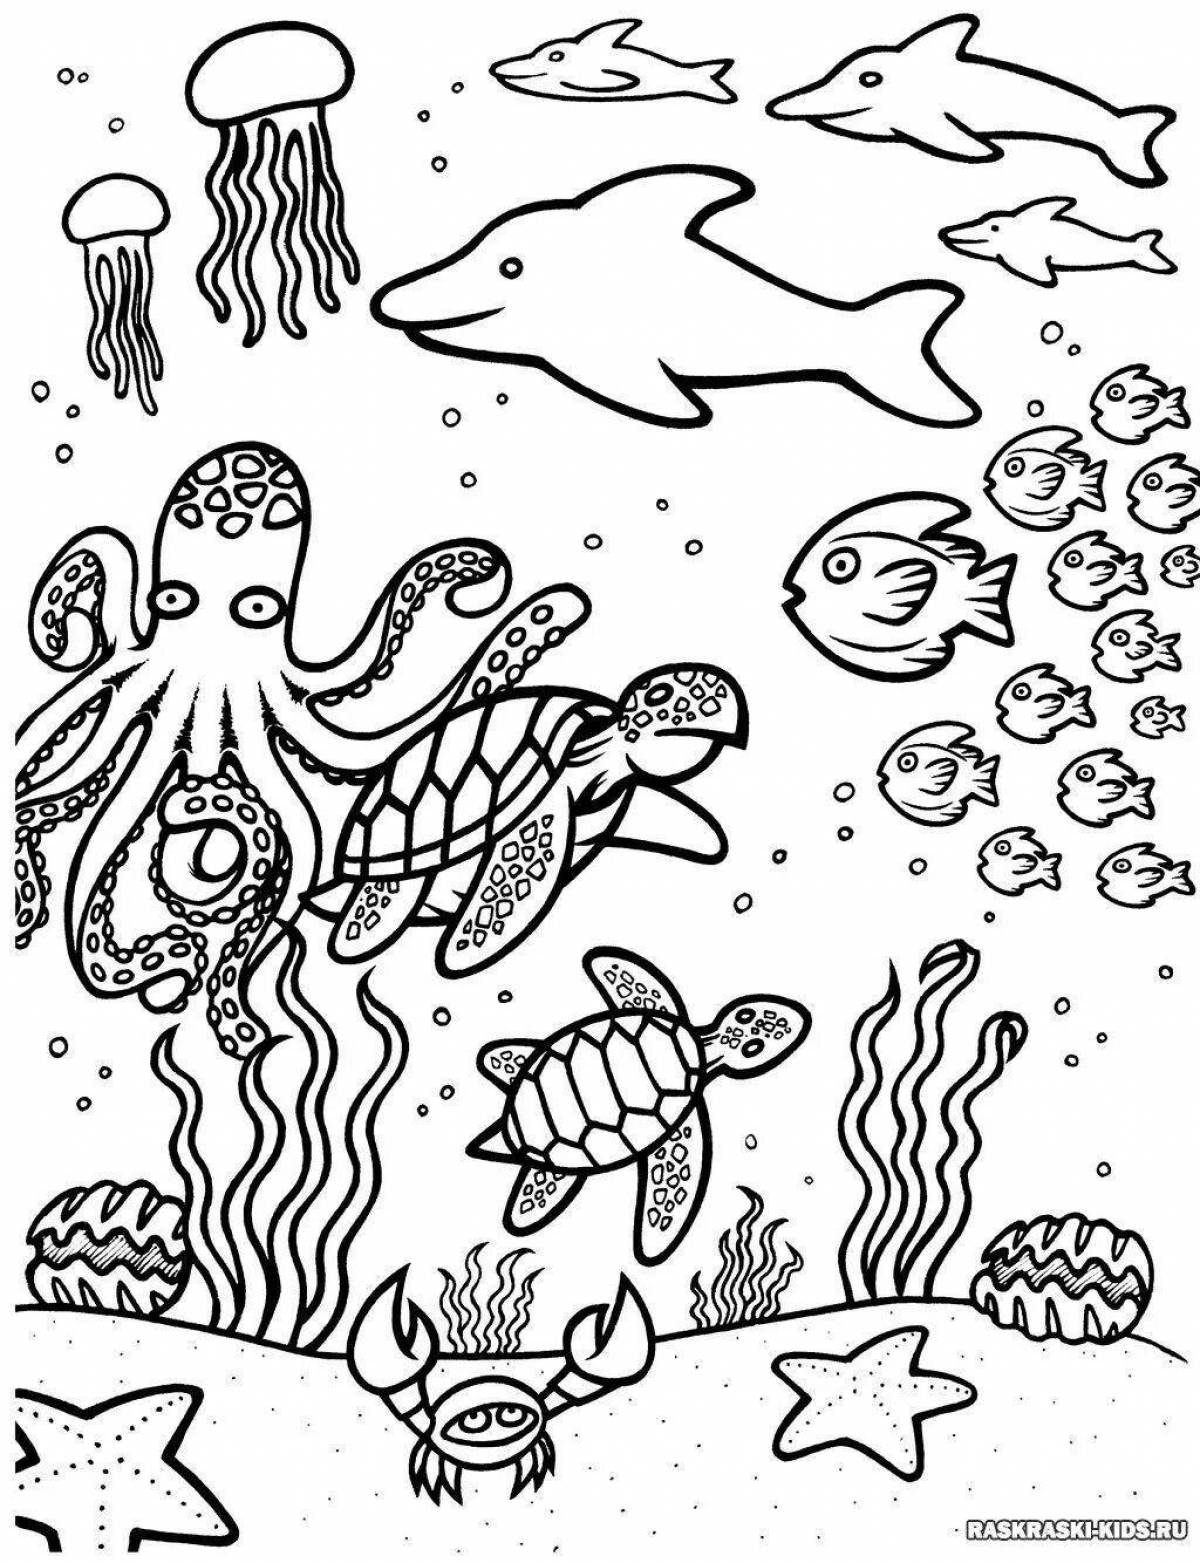 Fabulous water children's world coloring page